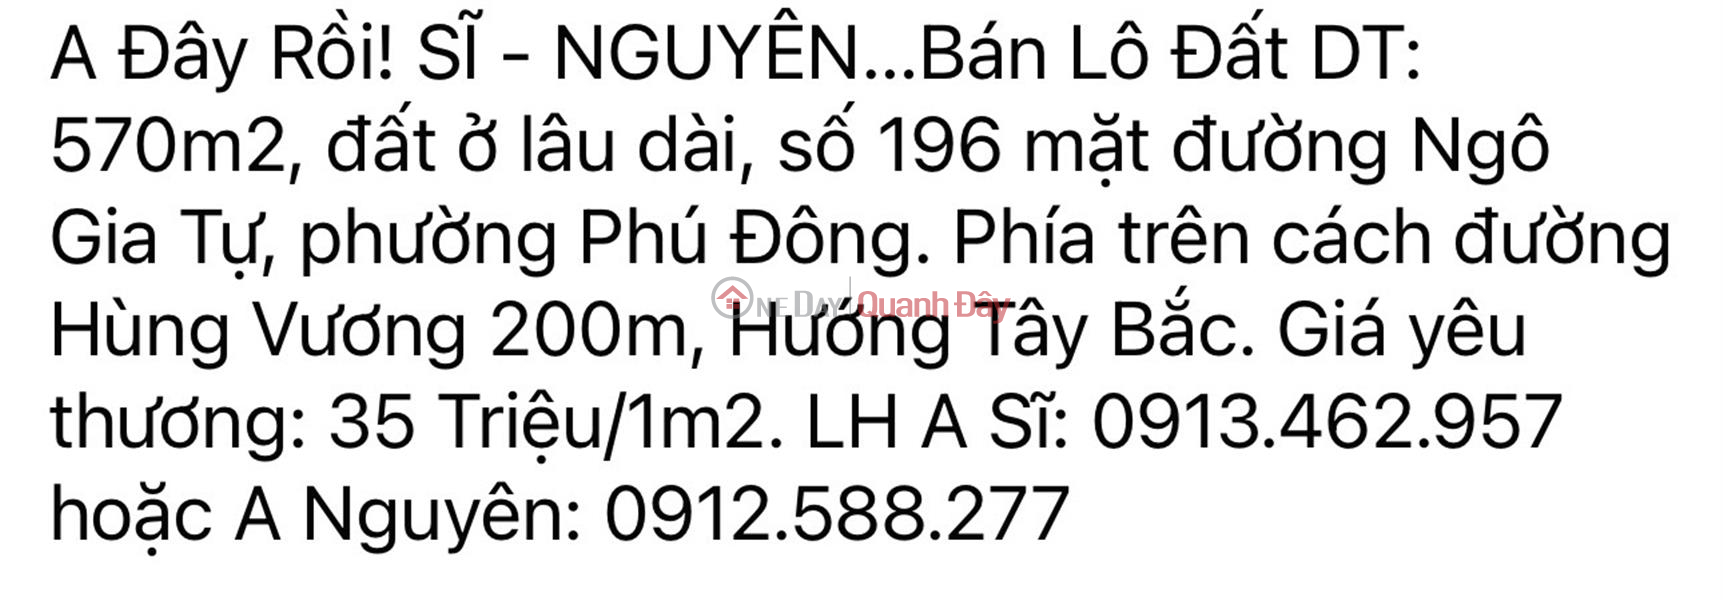 OWNER Needs to Sell LAND LOT Beautiful Location At 196 Ngo Gia Tu, Phu Dong Ward, Tuy Hoa City, Phu Yen Province. Sales Listings